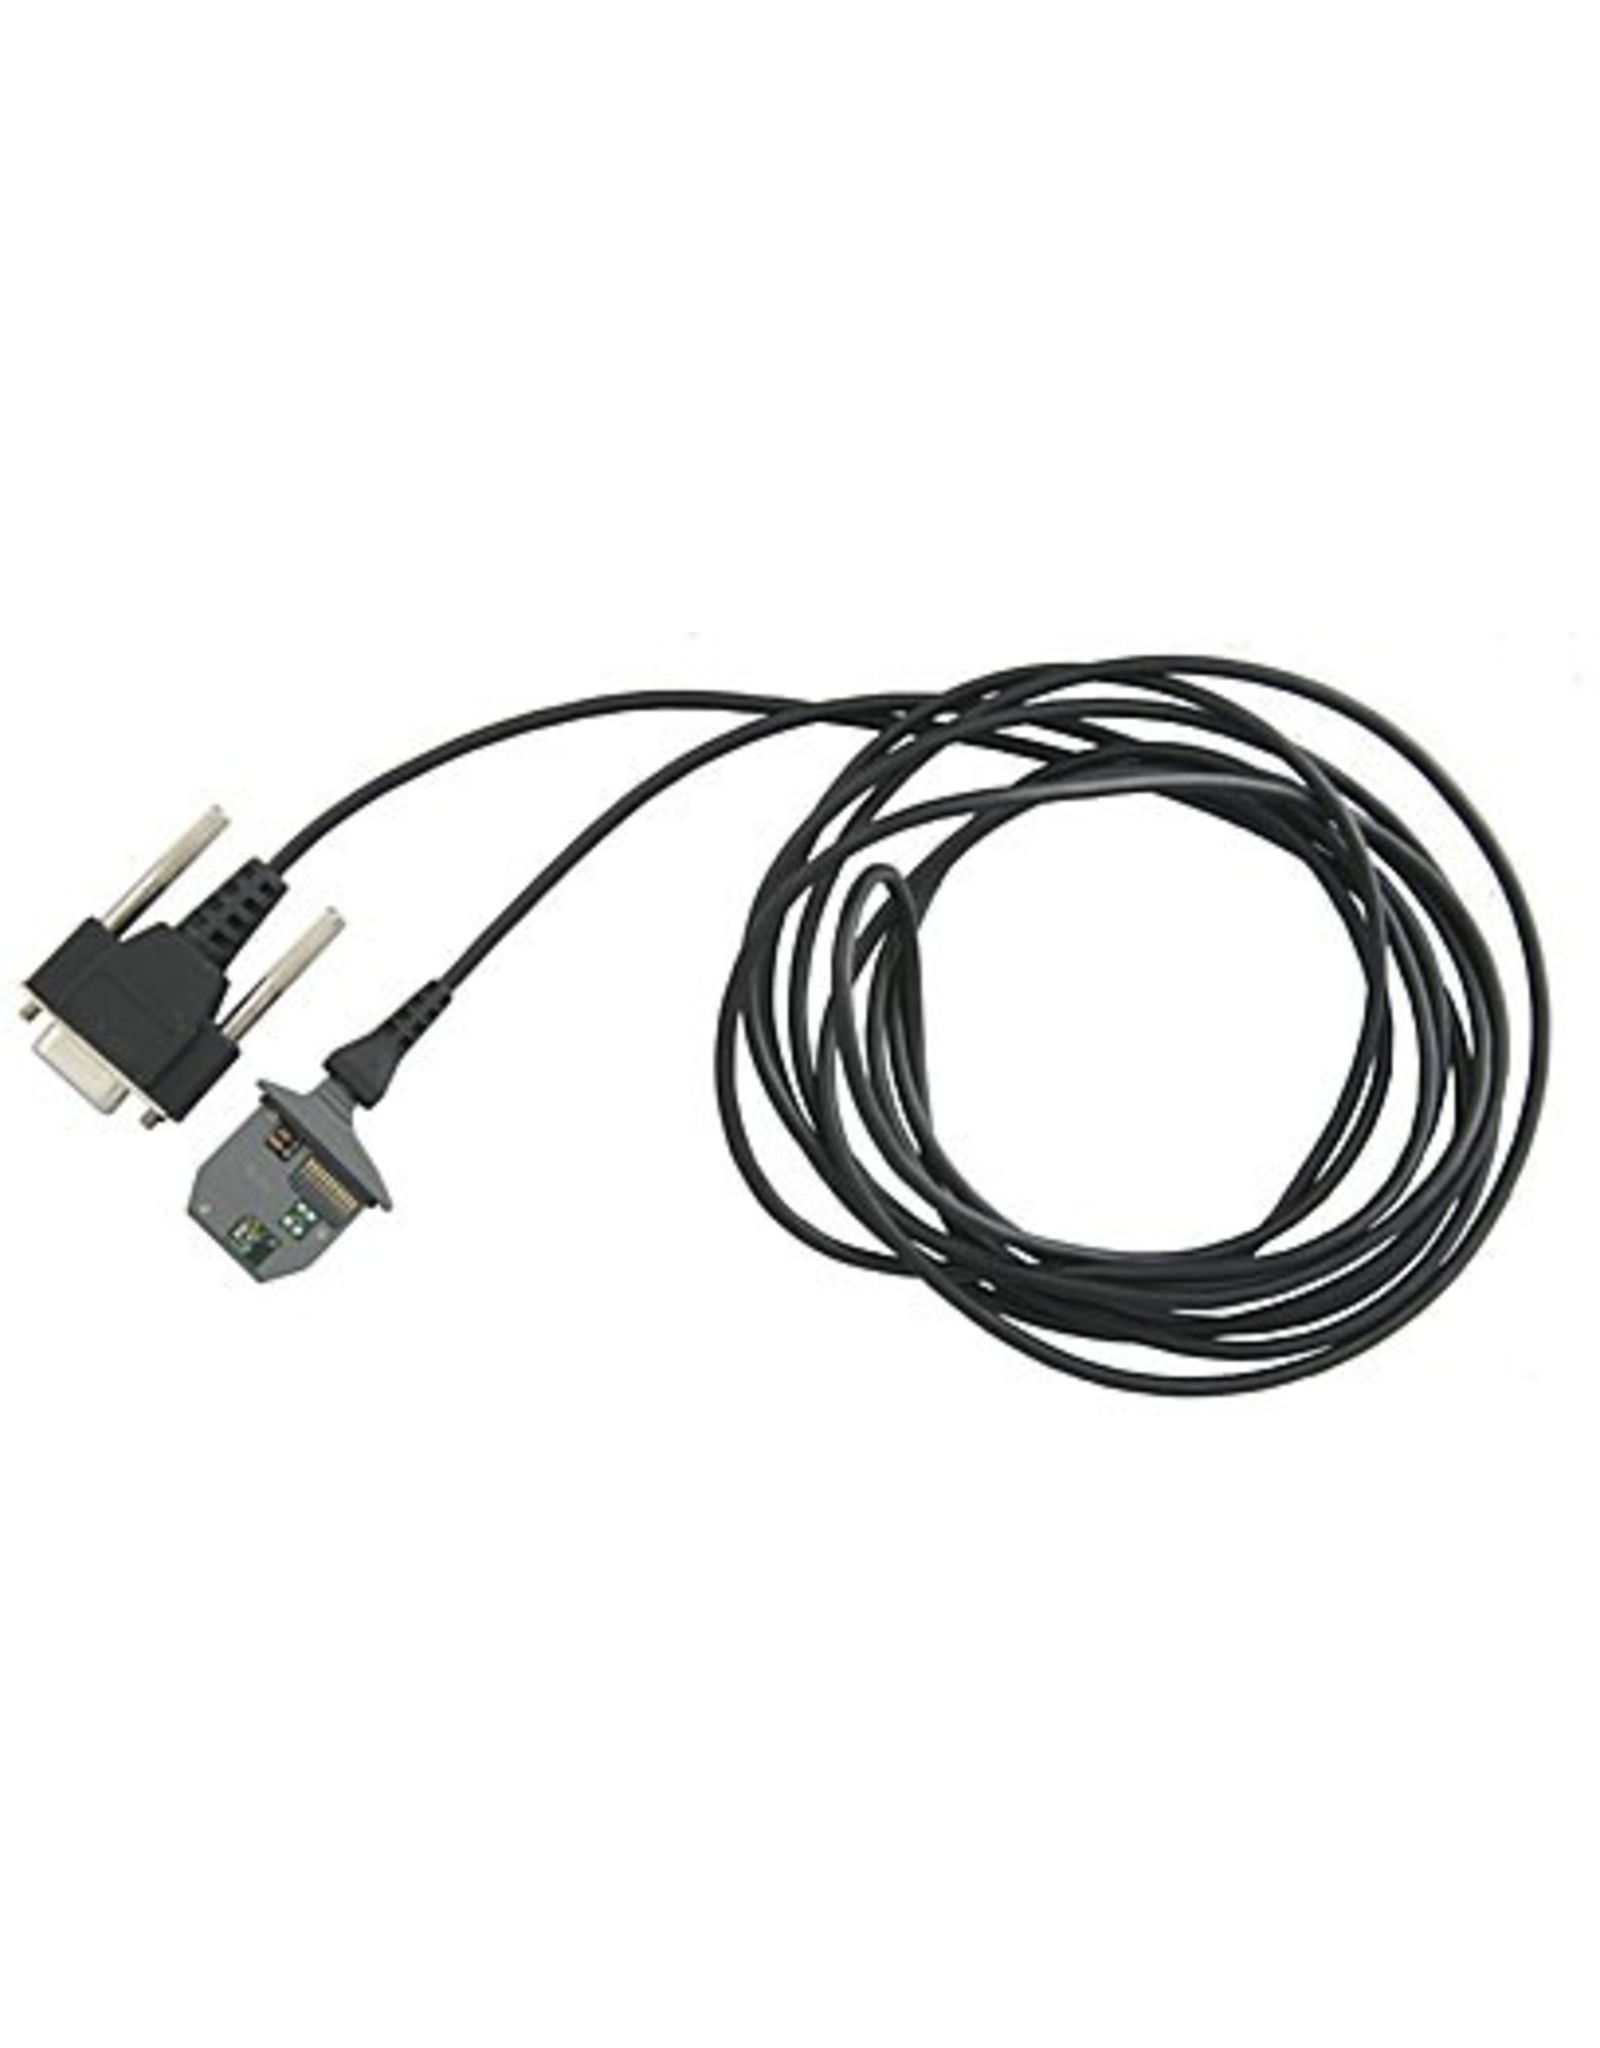 Tele vue Indicator Kit RS-232 Output Cable